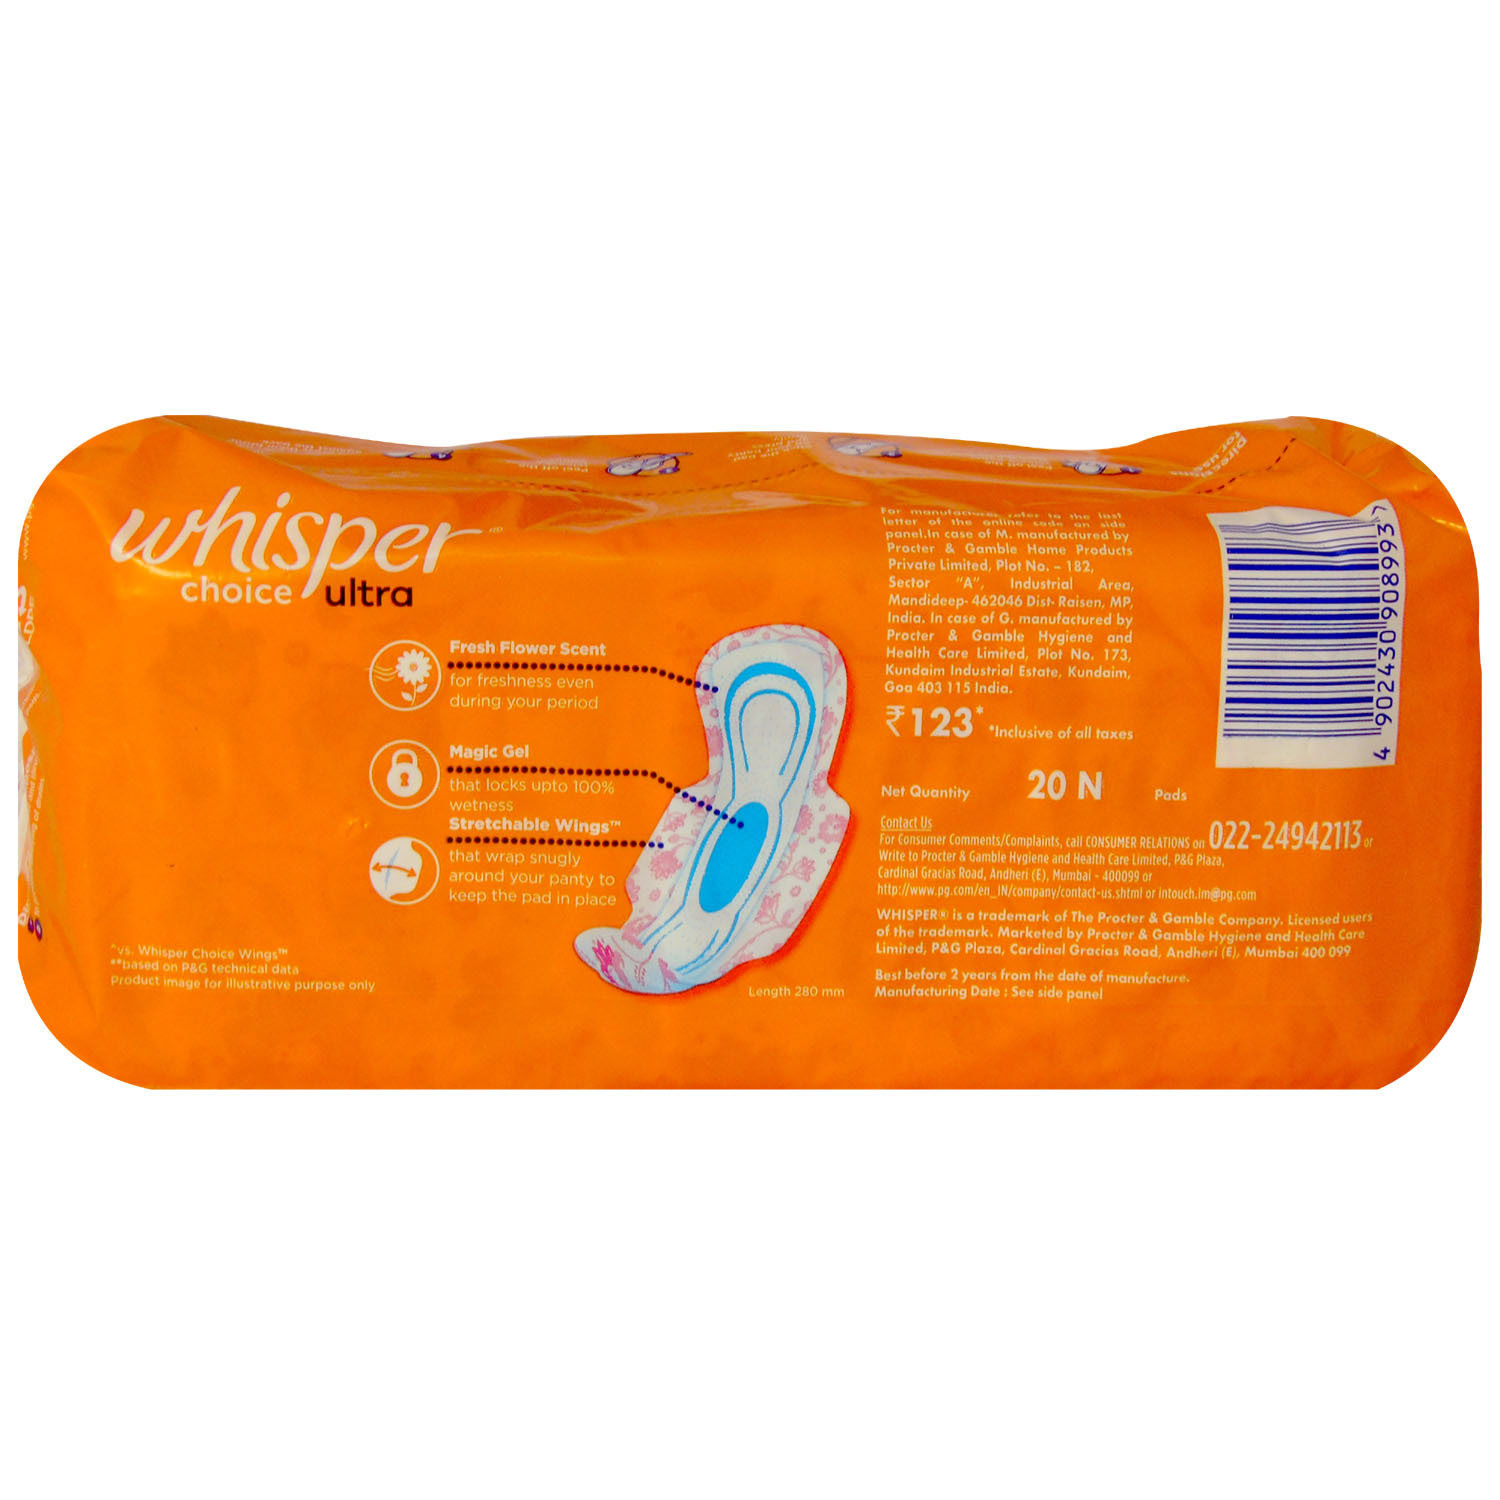 Whisper Choice Ultra Wings Sanitary Pads Regular, 20 Count, Pack of 1 